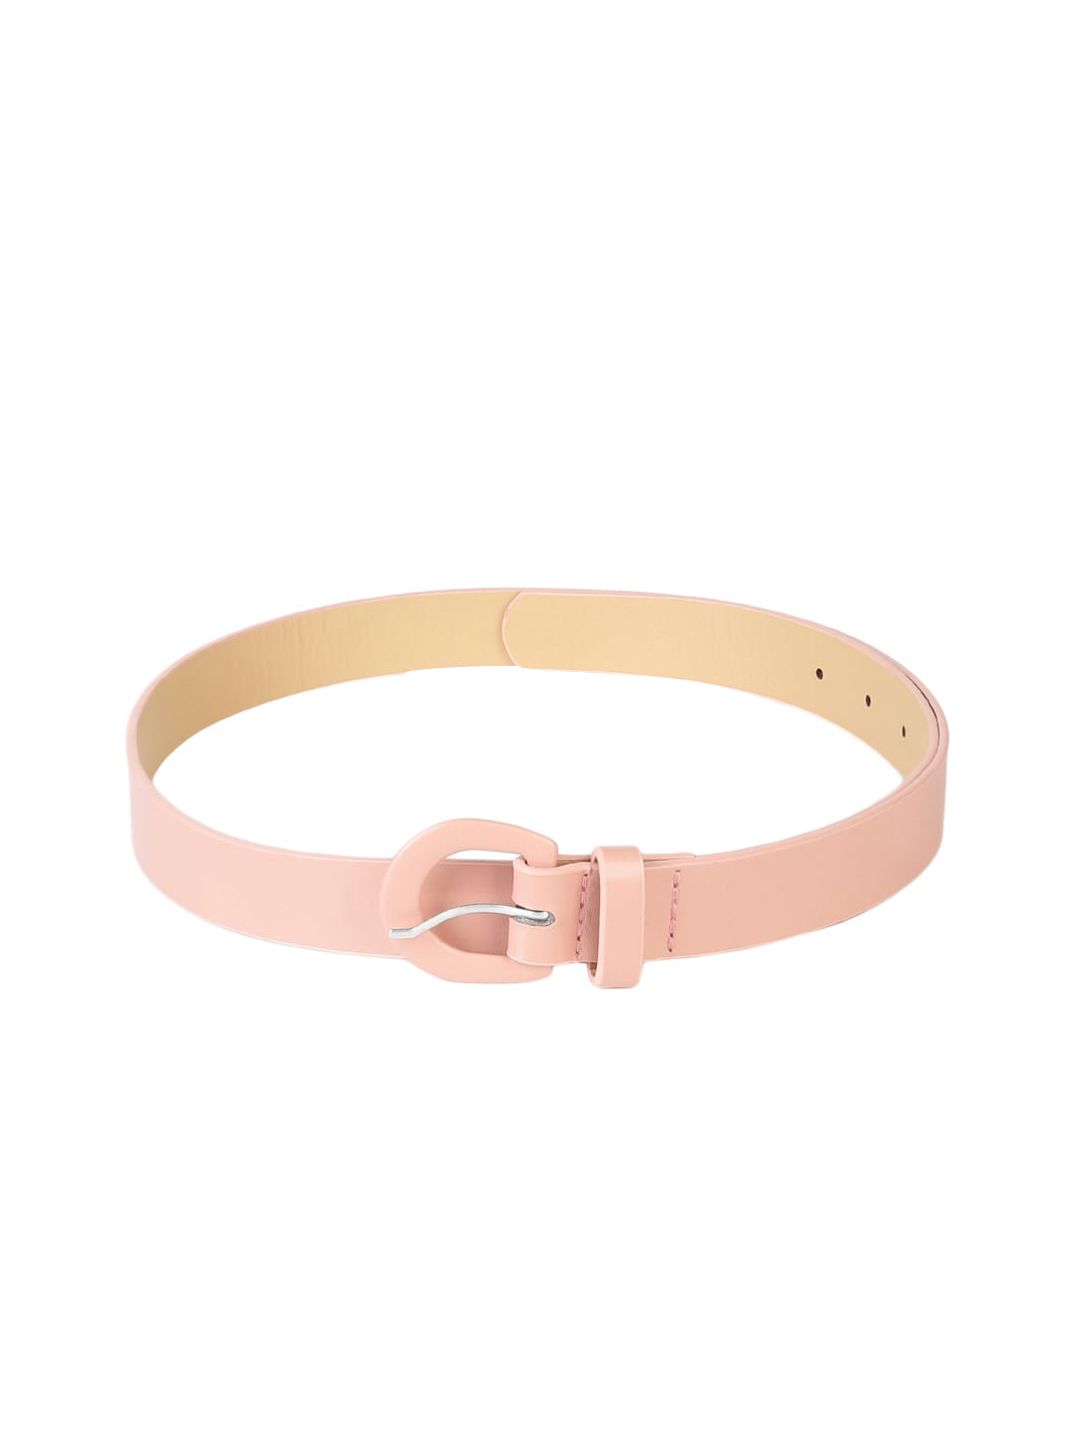 CRUSSET Women Peach-Coloured Solid Belt Price in India